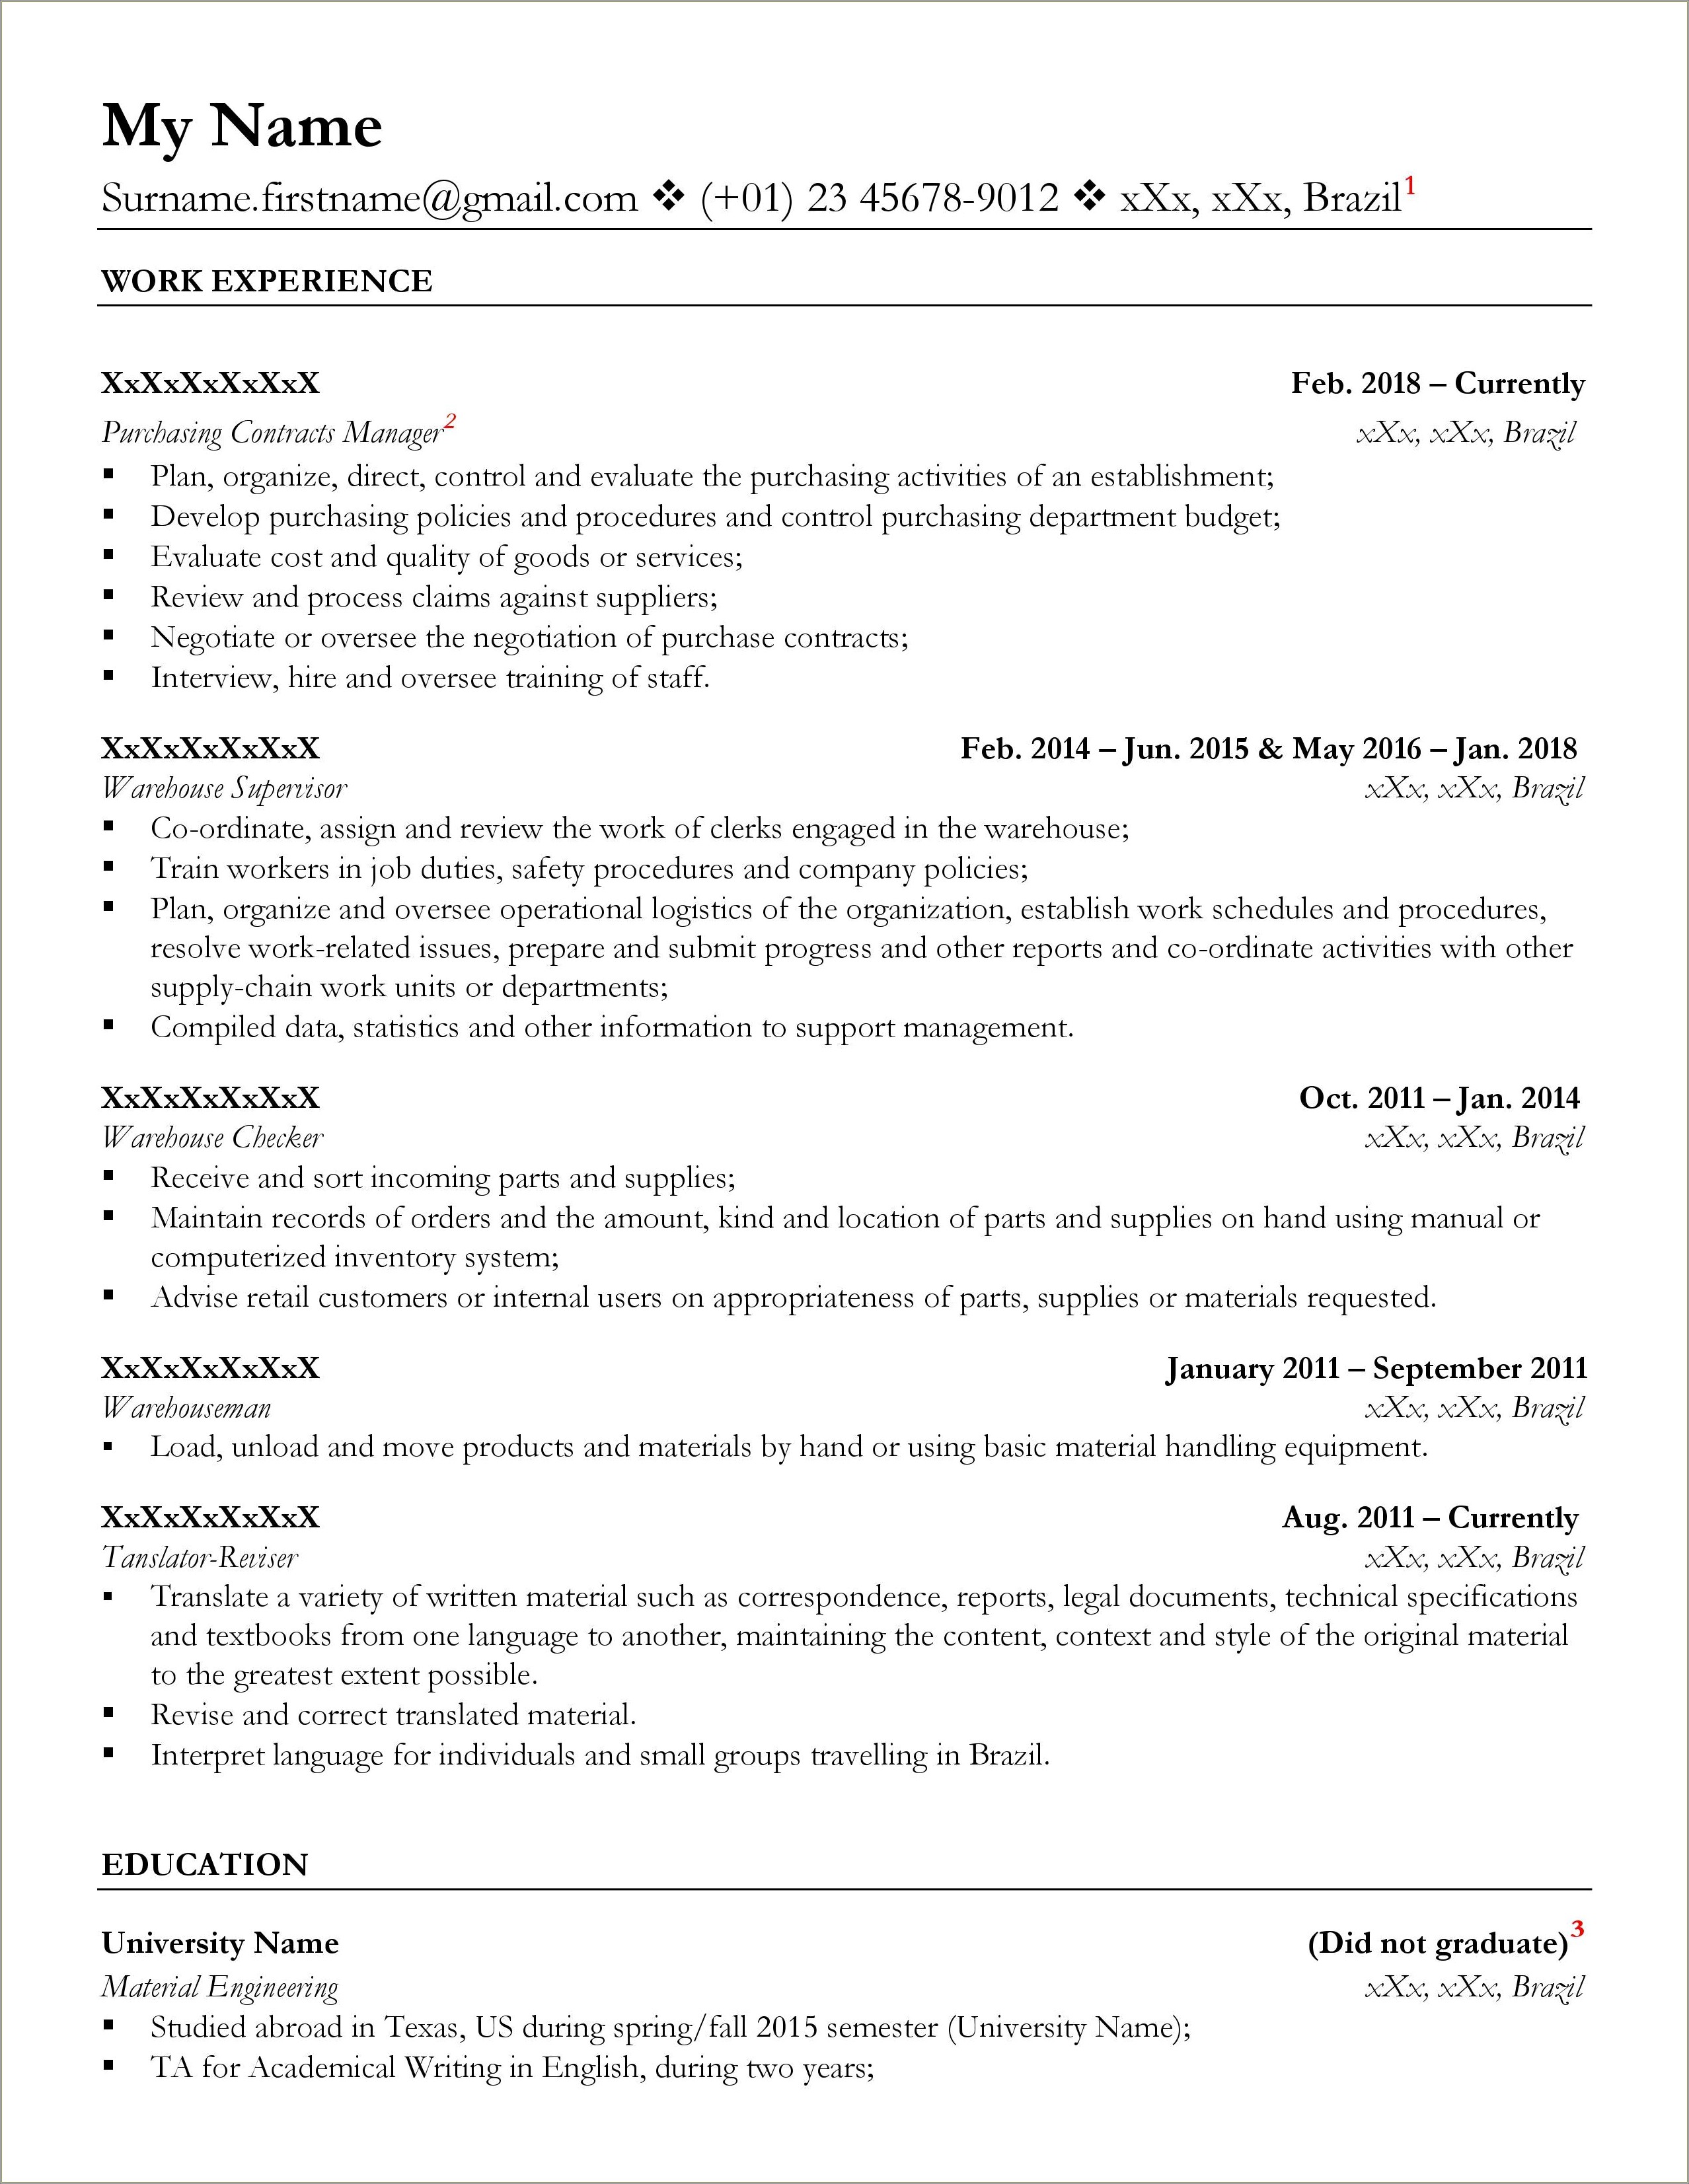 Where To Put Ta Position On Resume